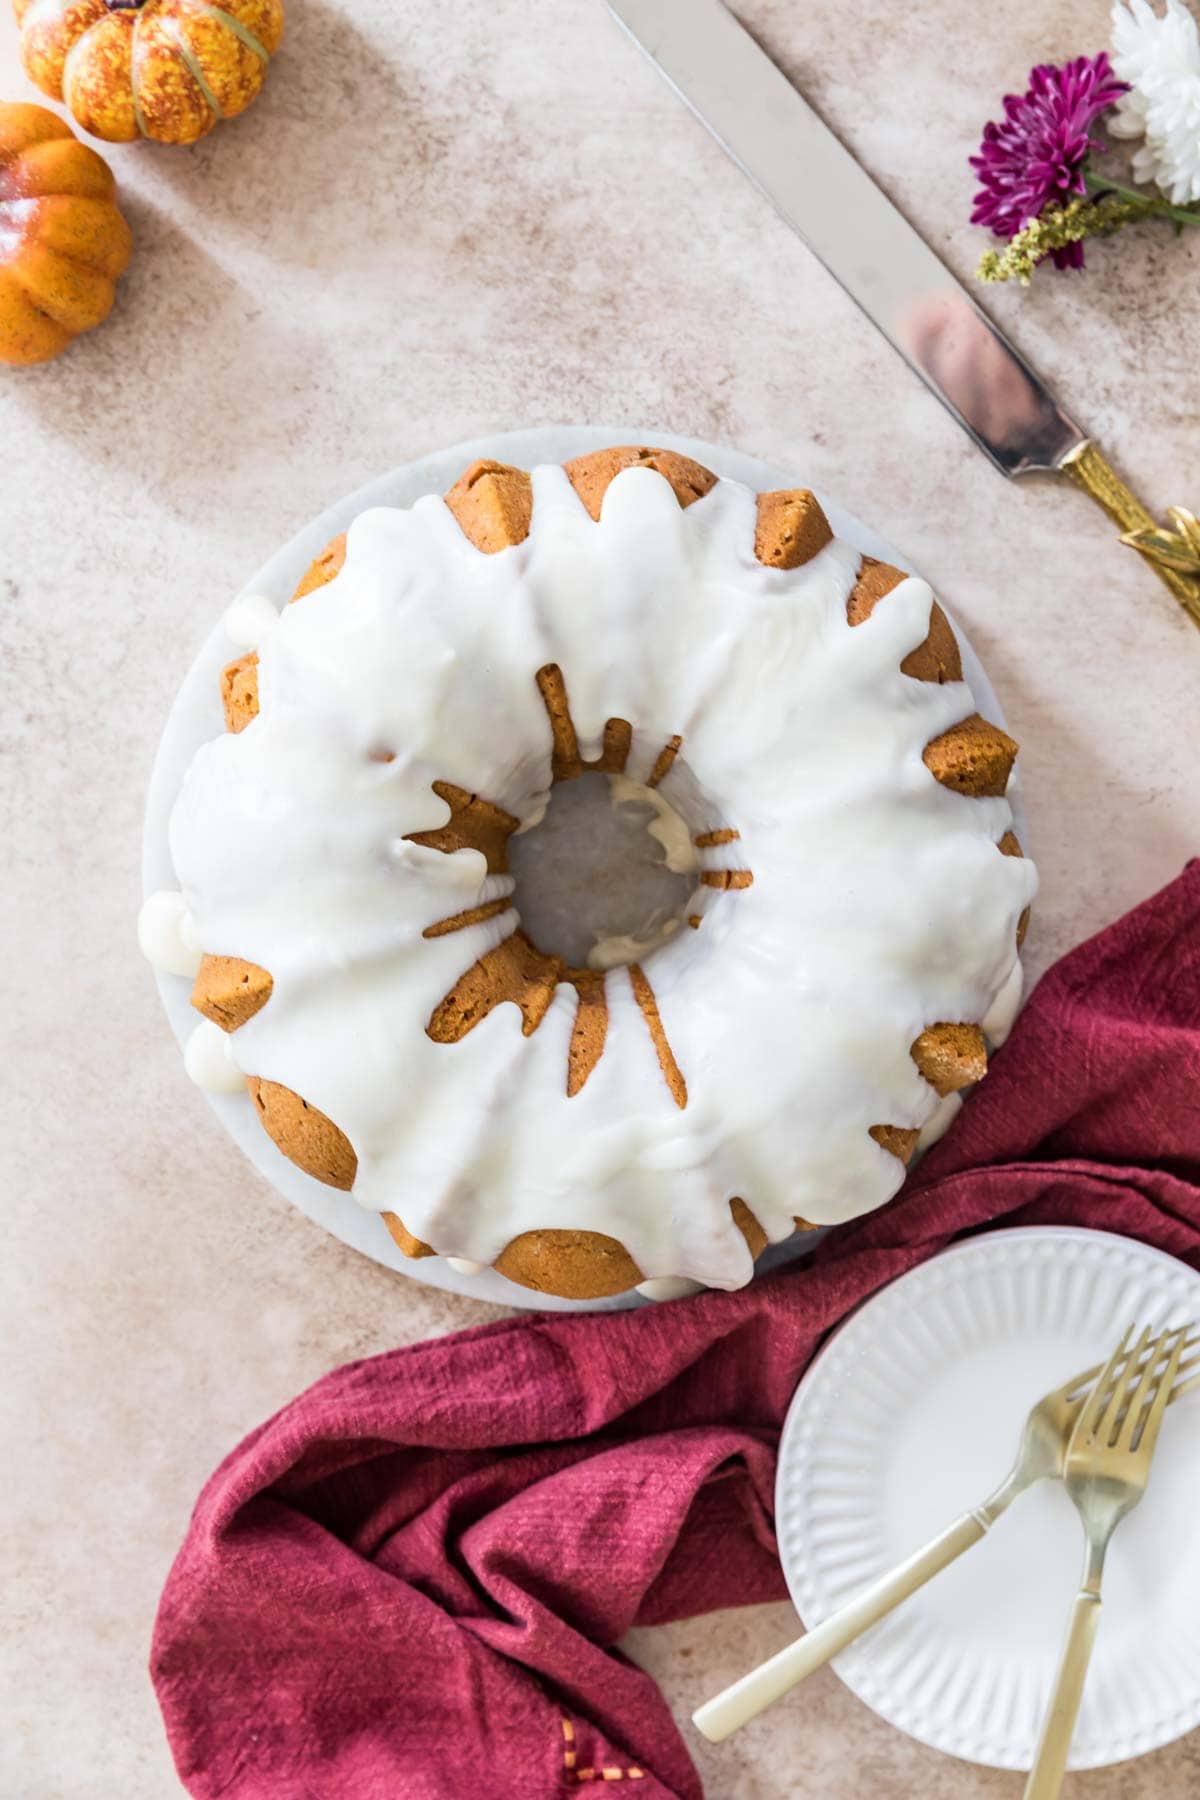 Overhead view of a bundt cake drizzled with white glaze.